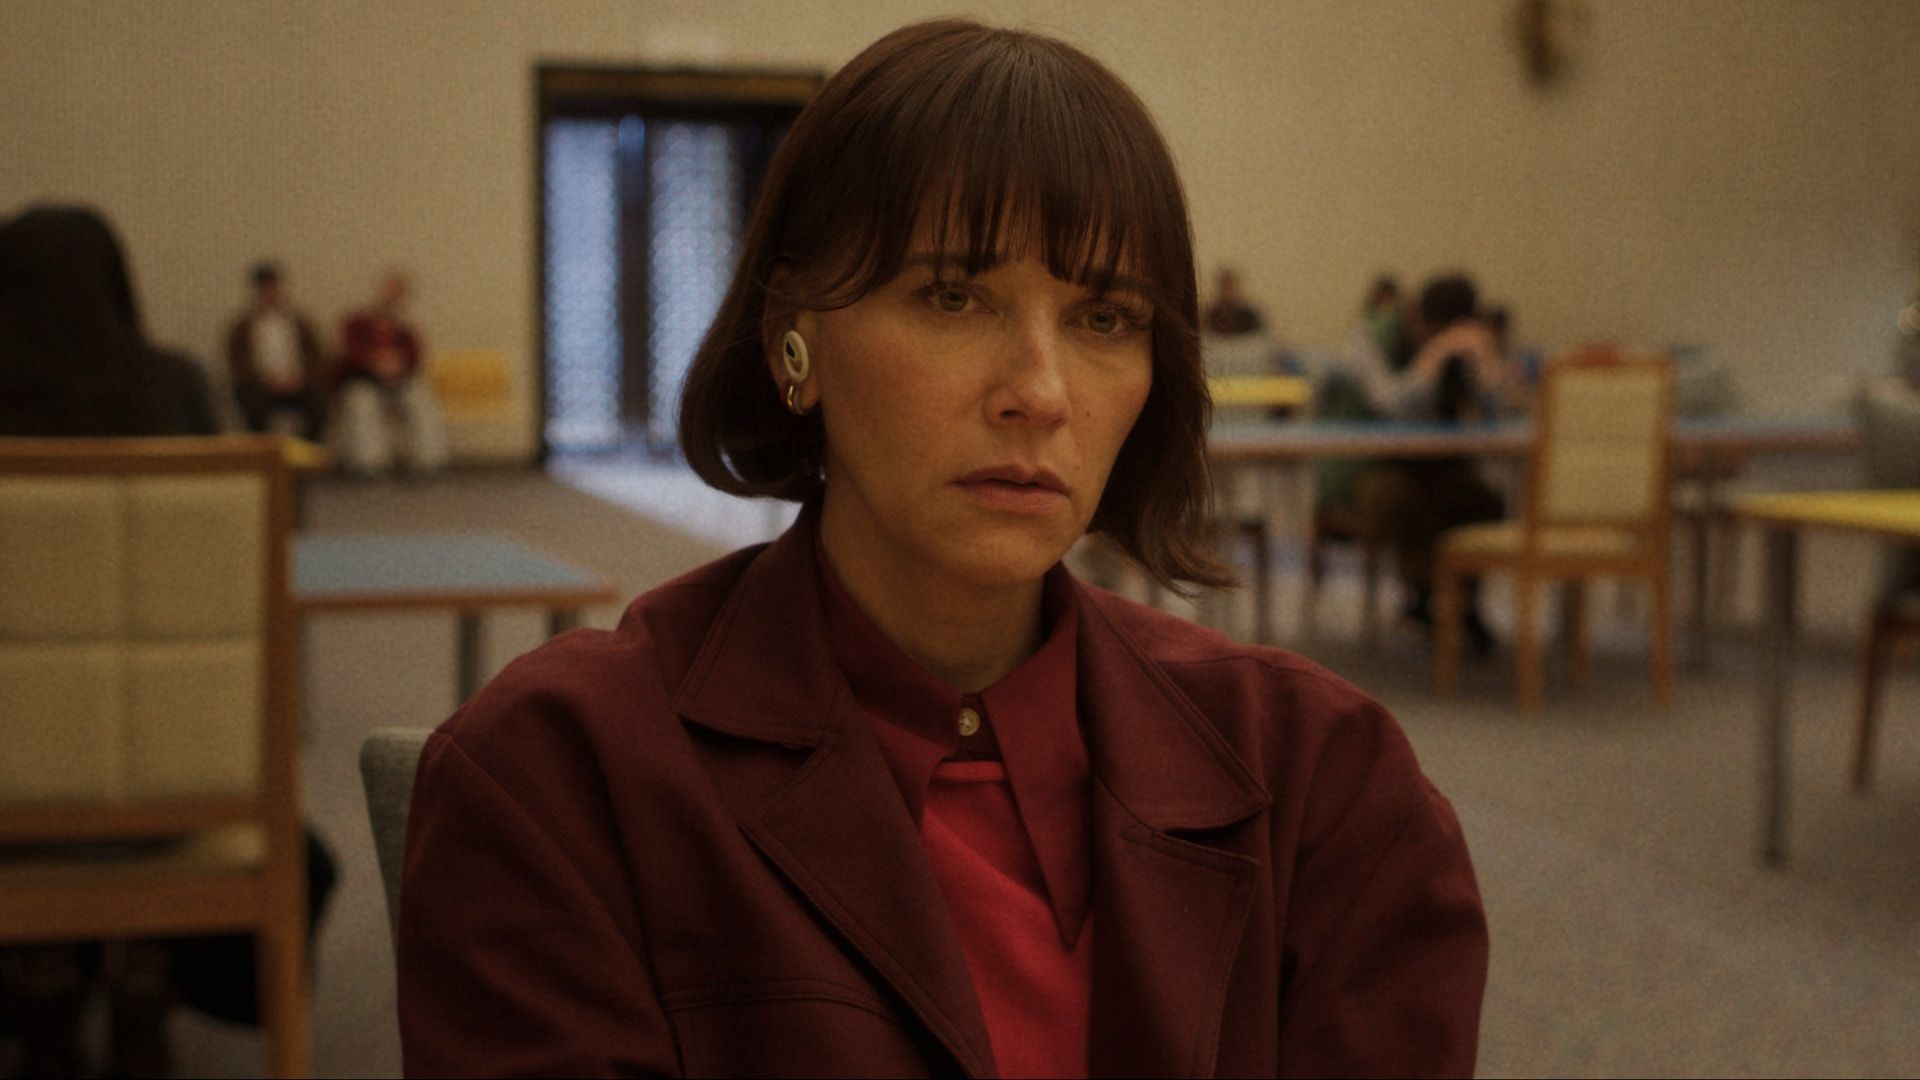 Rashida Jones in a red trench coat with a worried expression as Suzie in Sunny